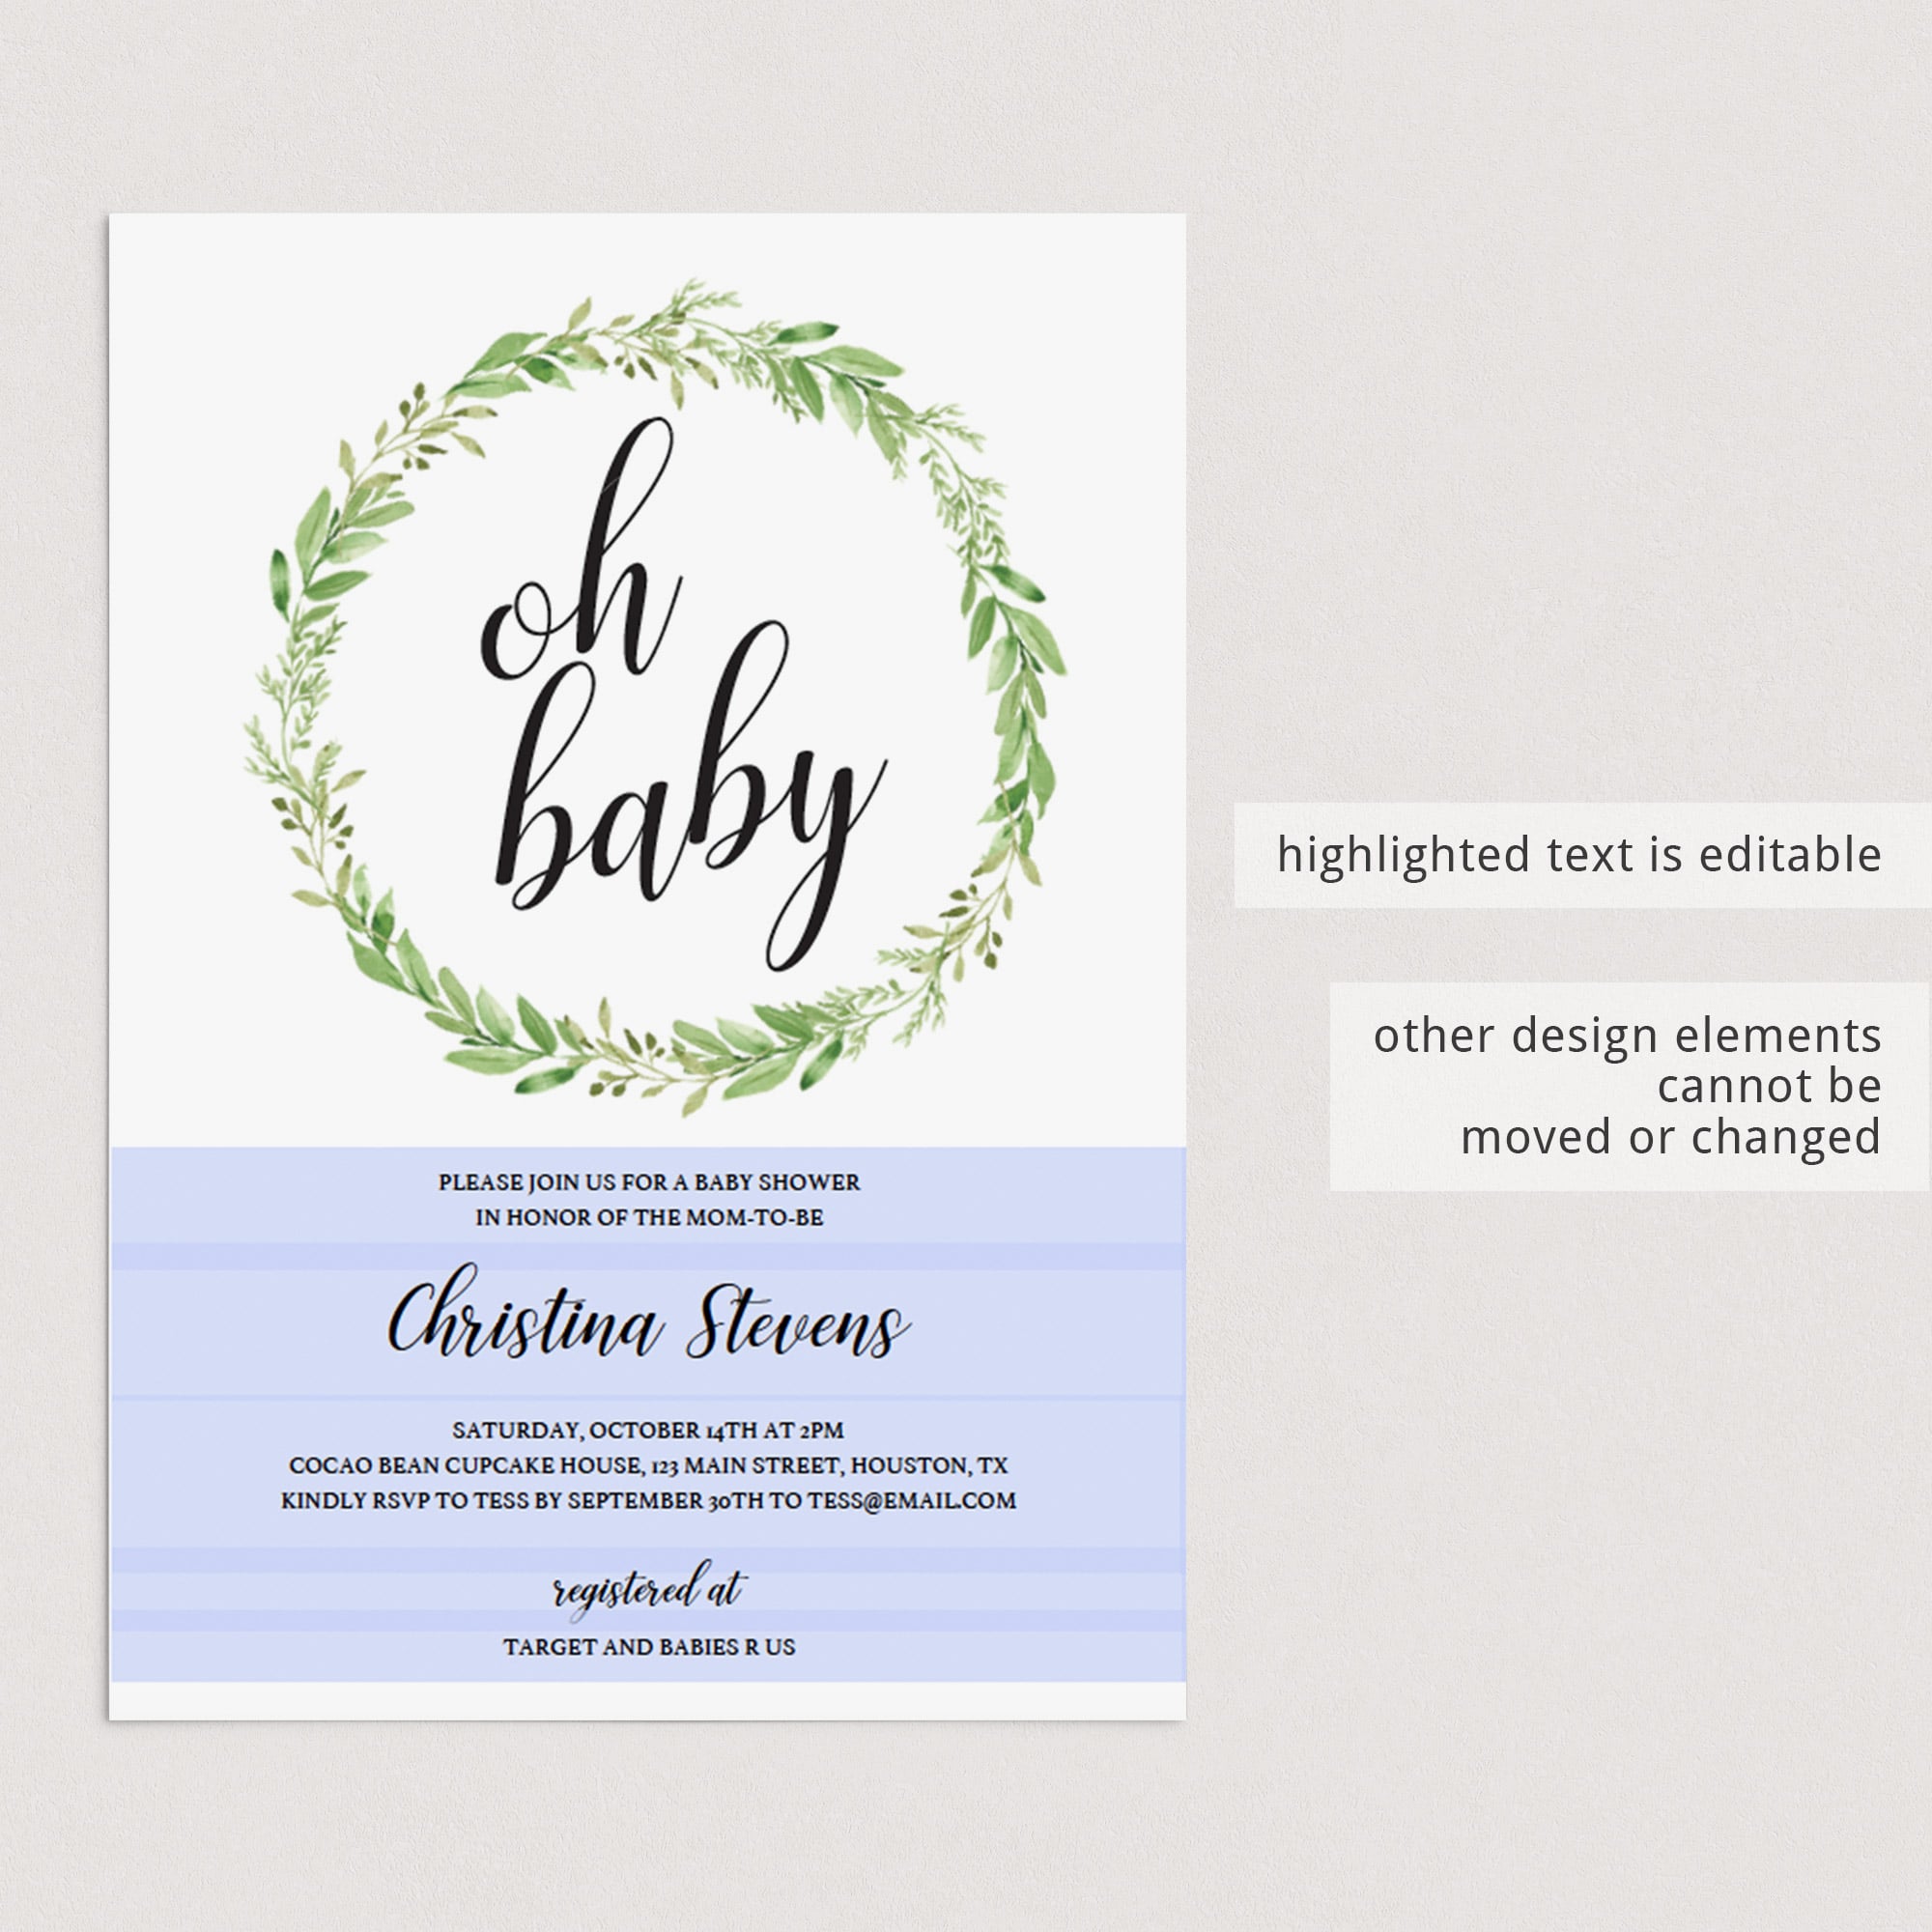 Baby shower invite template for gender neutral baby shower by LittleSizzle